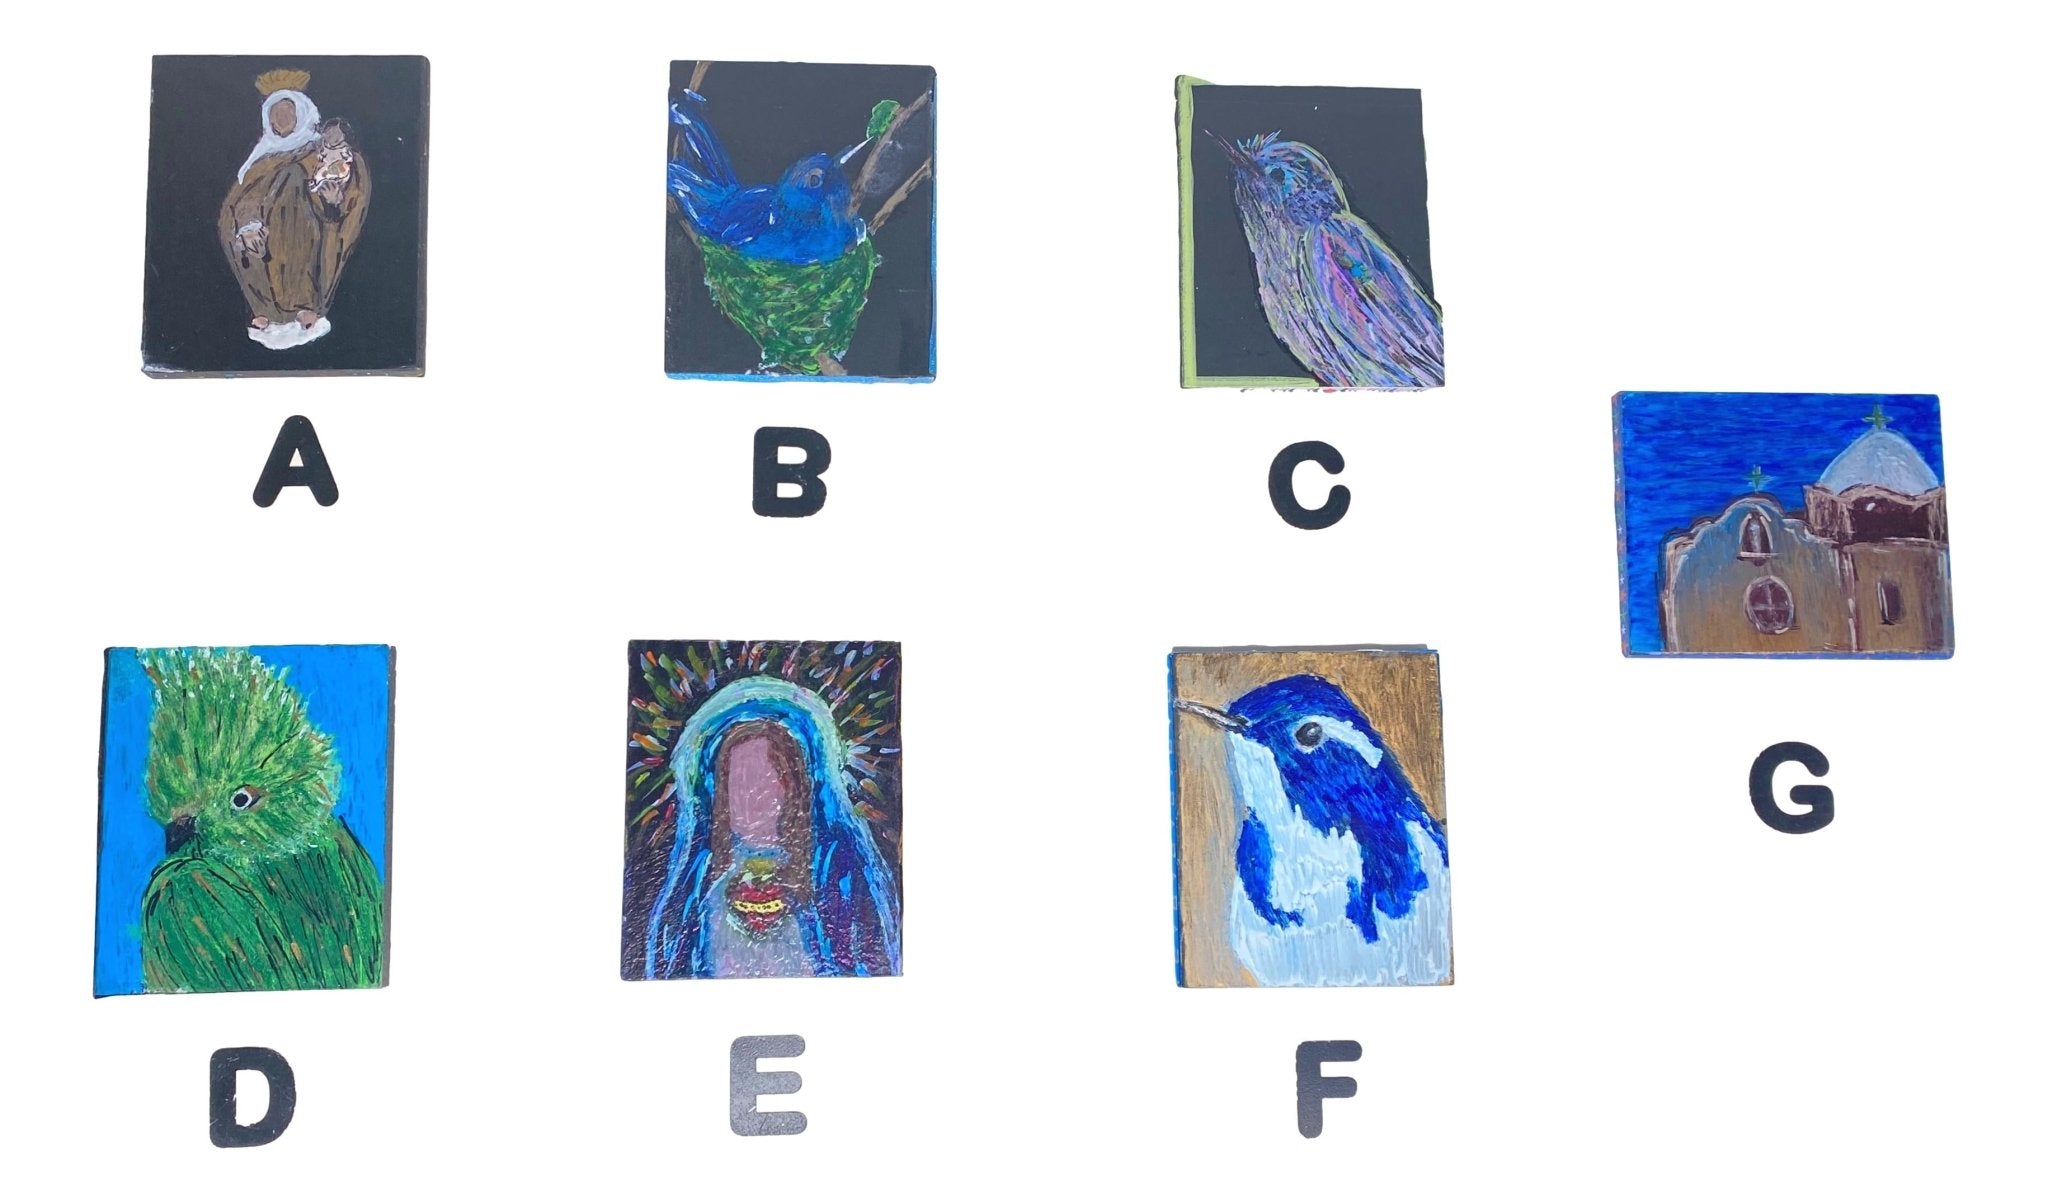 Magnets Wood Birds & Religious Designs Handcrafted by Local Artist 3 1/2 L x 3 W Inches - Ysleta Mission Gift Shop- VOTED 2022 El Paso's Best Gift Shop